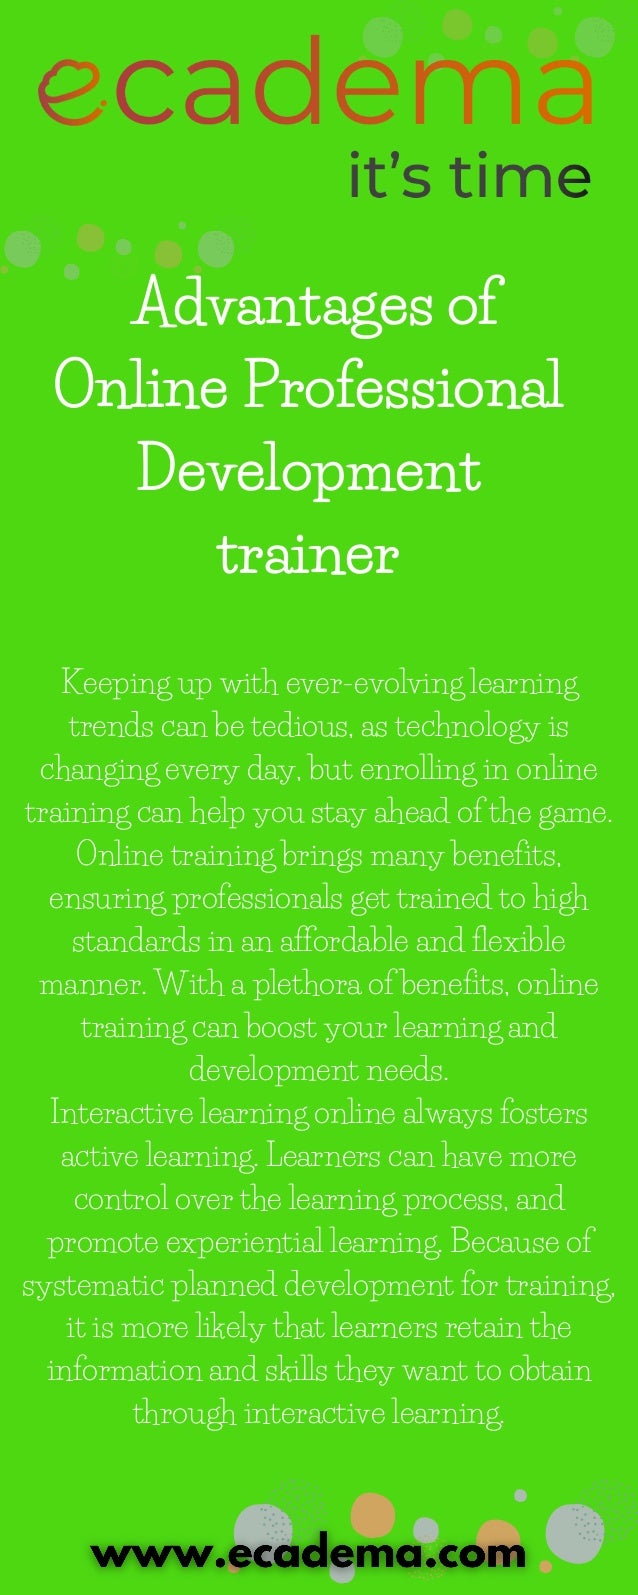 Advantages of
Online Professional
Development
trainer
Keeping up with ever-evolving learning
trends can be tedious, as technology is
changing every day, but enrolling in online
training can help you stay ahead of the game.
Online training brings many benefits,
ensuring professionals get trained to high
standards in an affordable and flexible
manner. With a plethora of benefits, online
training can boost your learning and
development needs.
Interactive learning online always fosters
active learning. Learners can have more
control over the learning process, and
promote experiential learning. Because of
systematic planned development for training,
it is more likely that learners retain the
information and skills they want to obtain
through interactive learning.
 